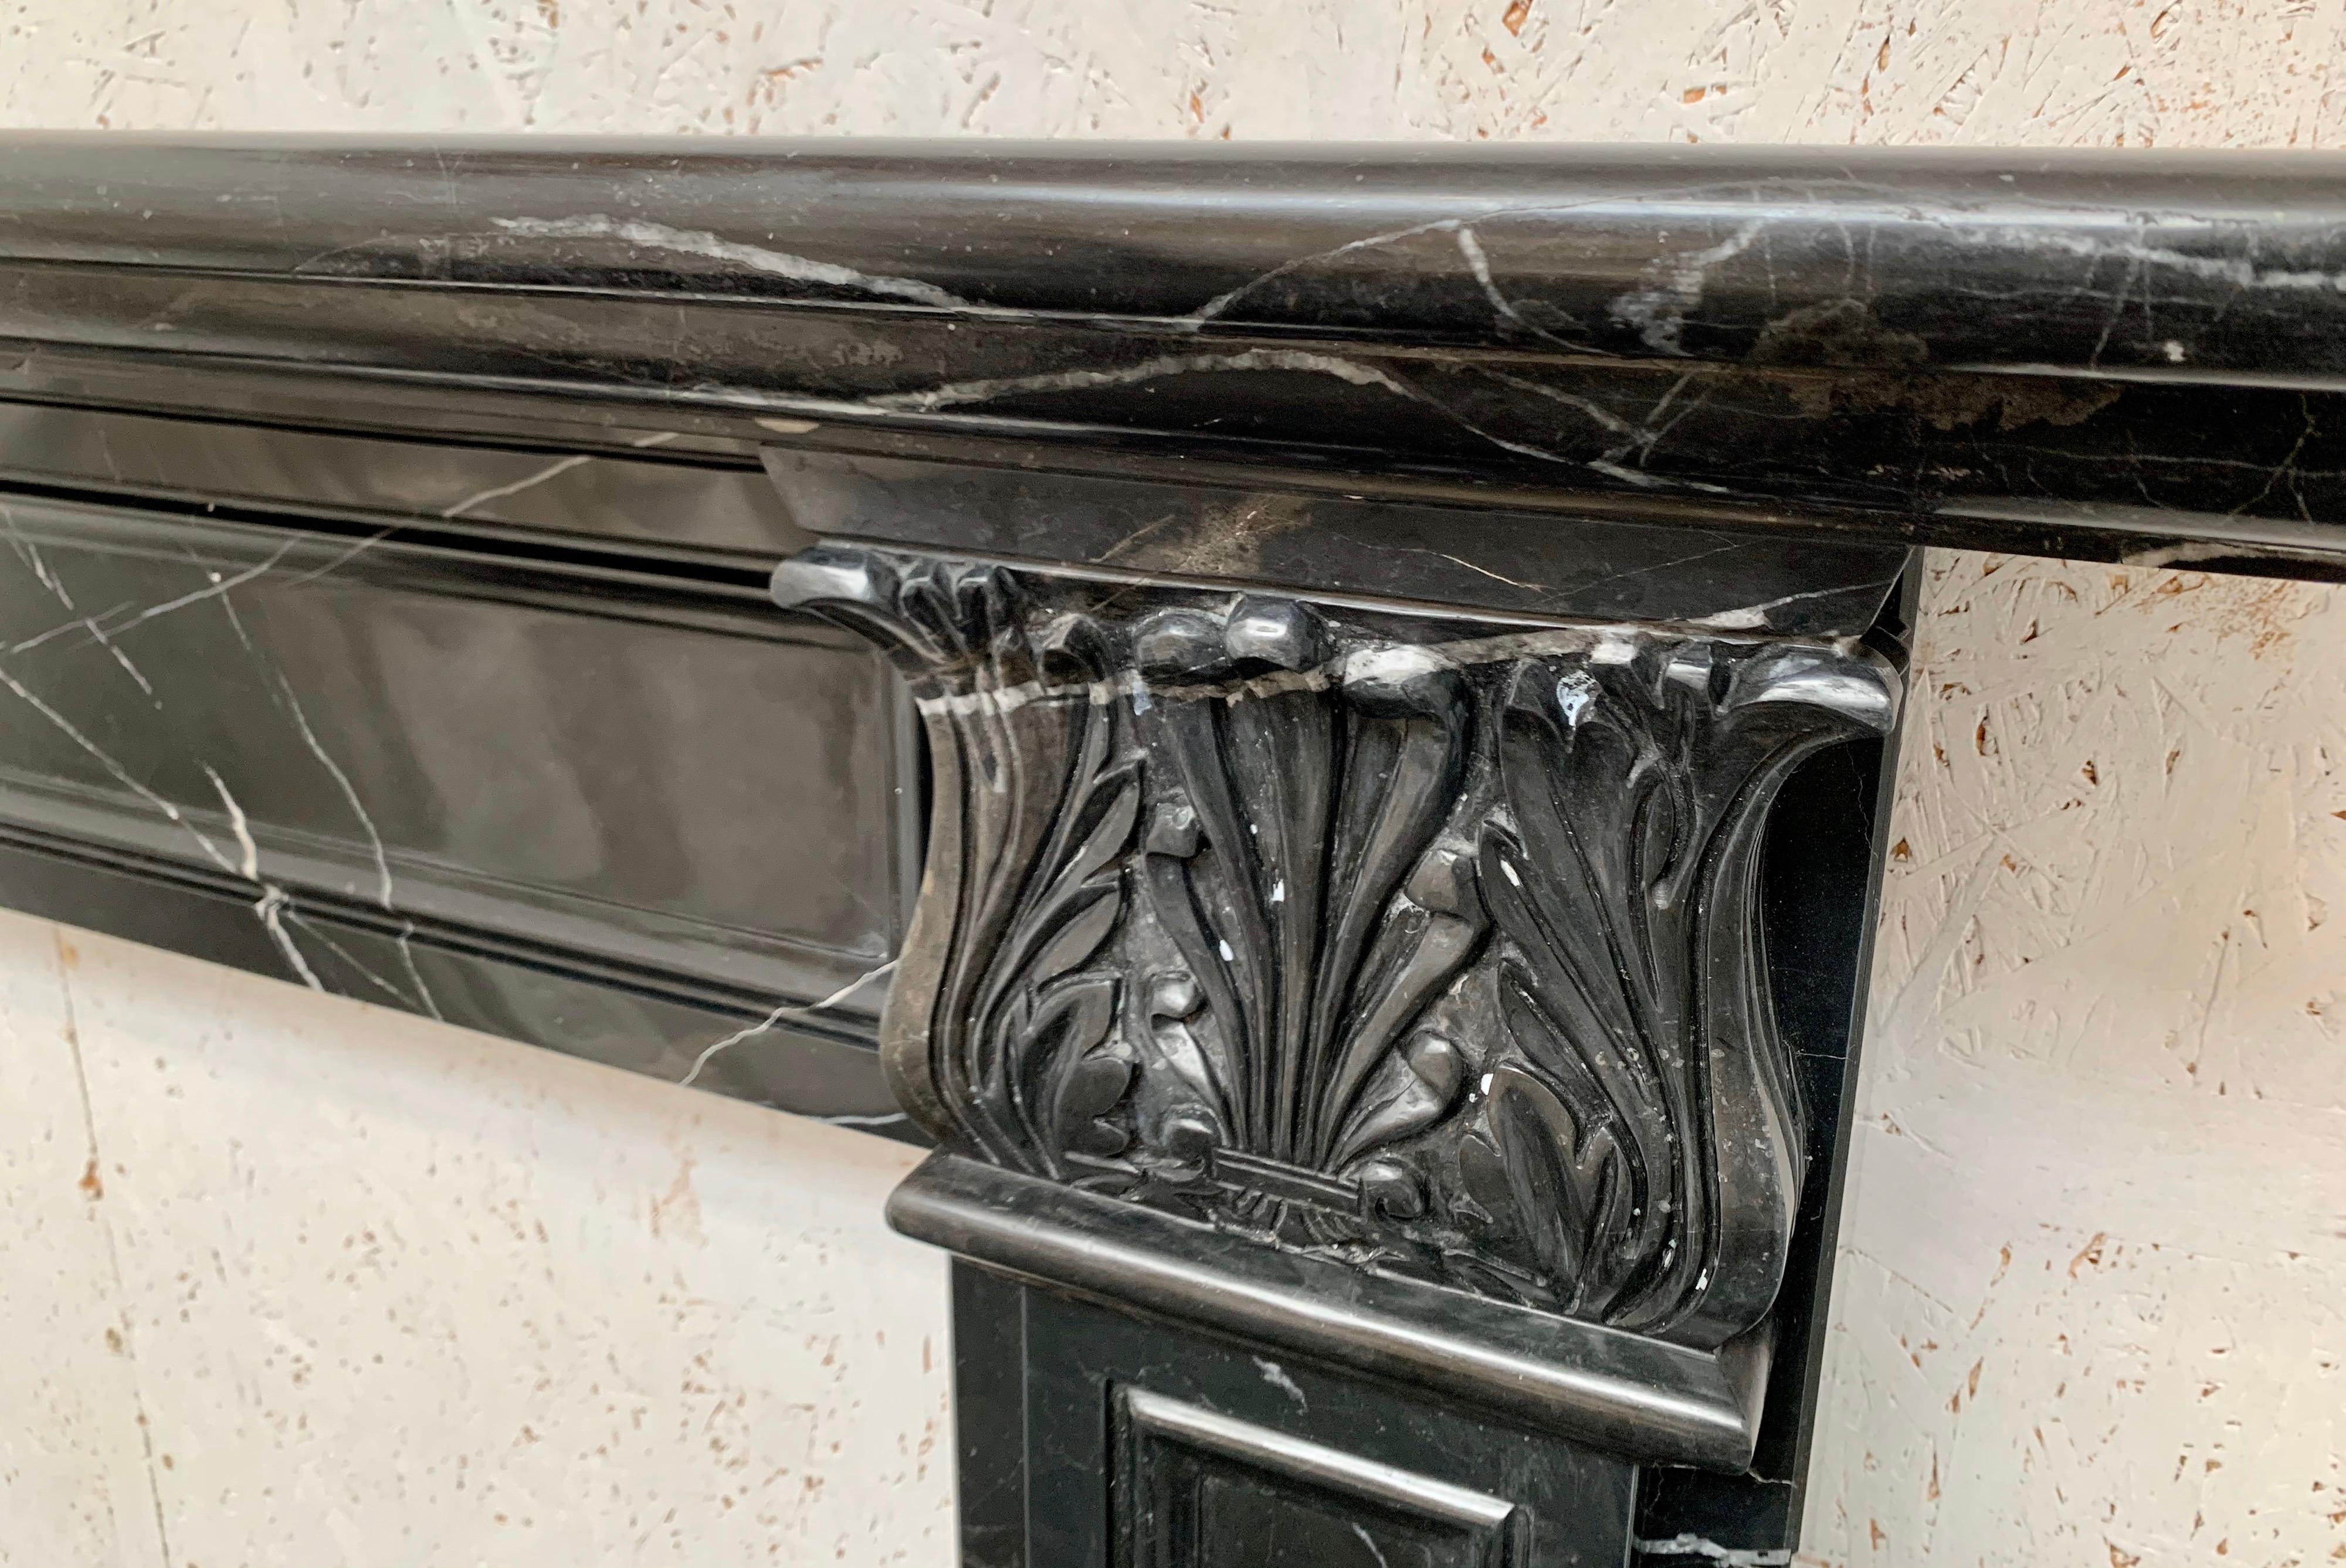 A beautiful hand carved marble fireplace.
With delightful white Veinage, classical pilasters with finely hand carved anthemion-leaf capitals distinguish this Regency style chimneypiece.
A restrained design capable of adapting to any environment.